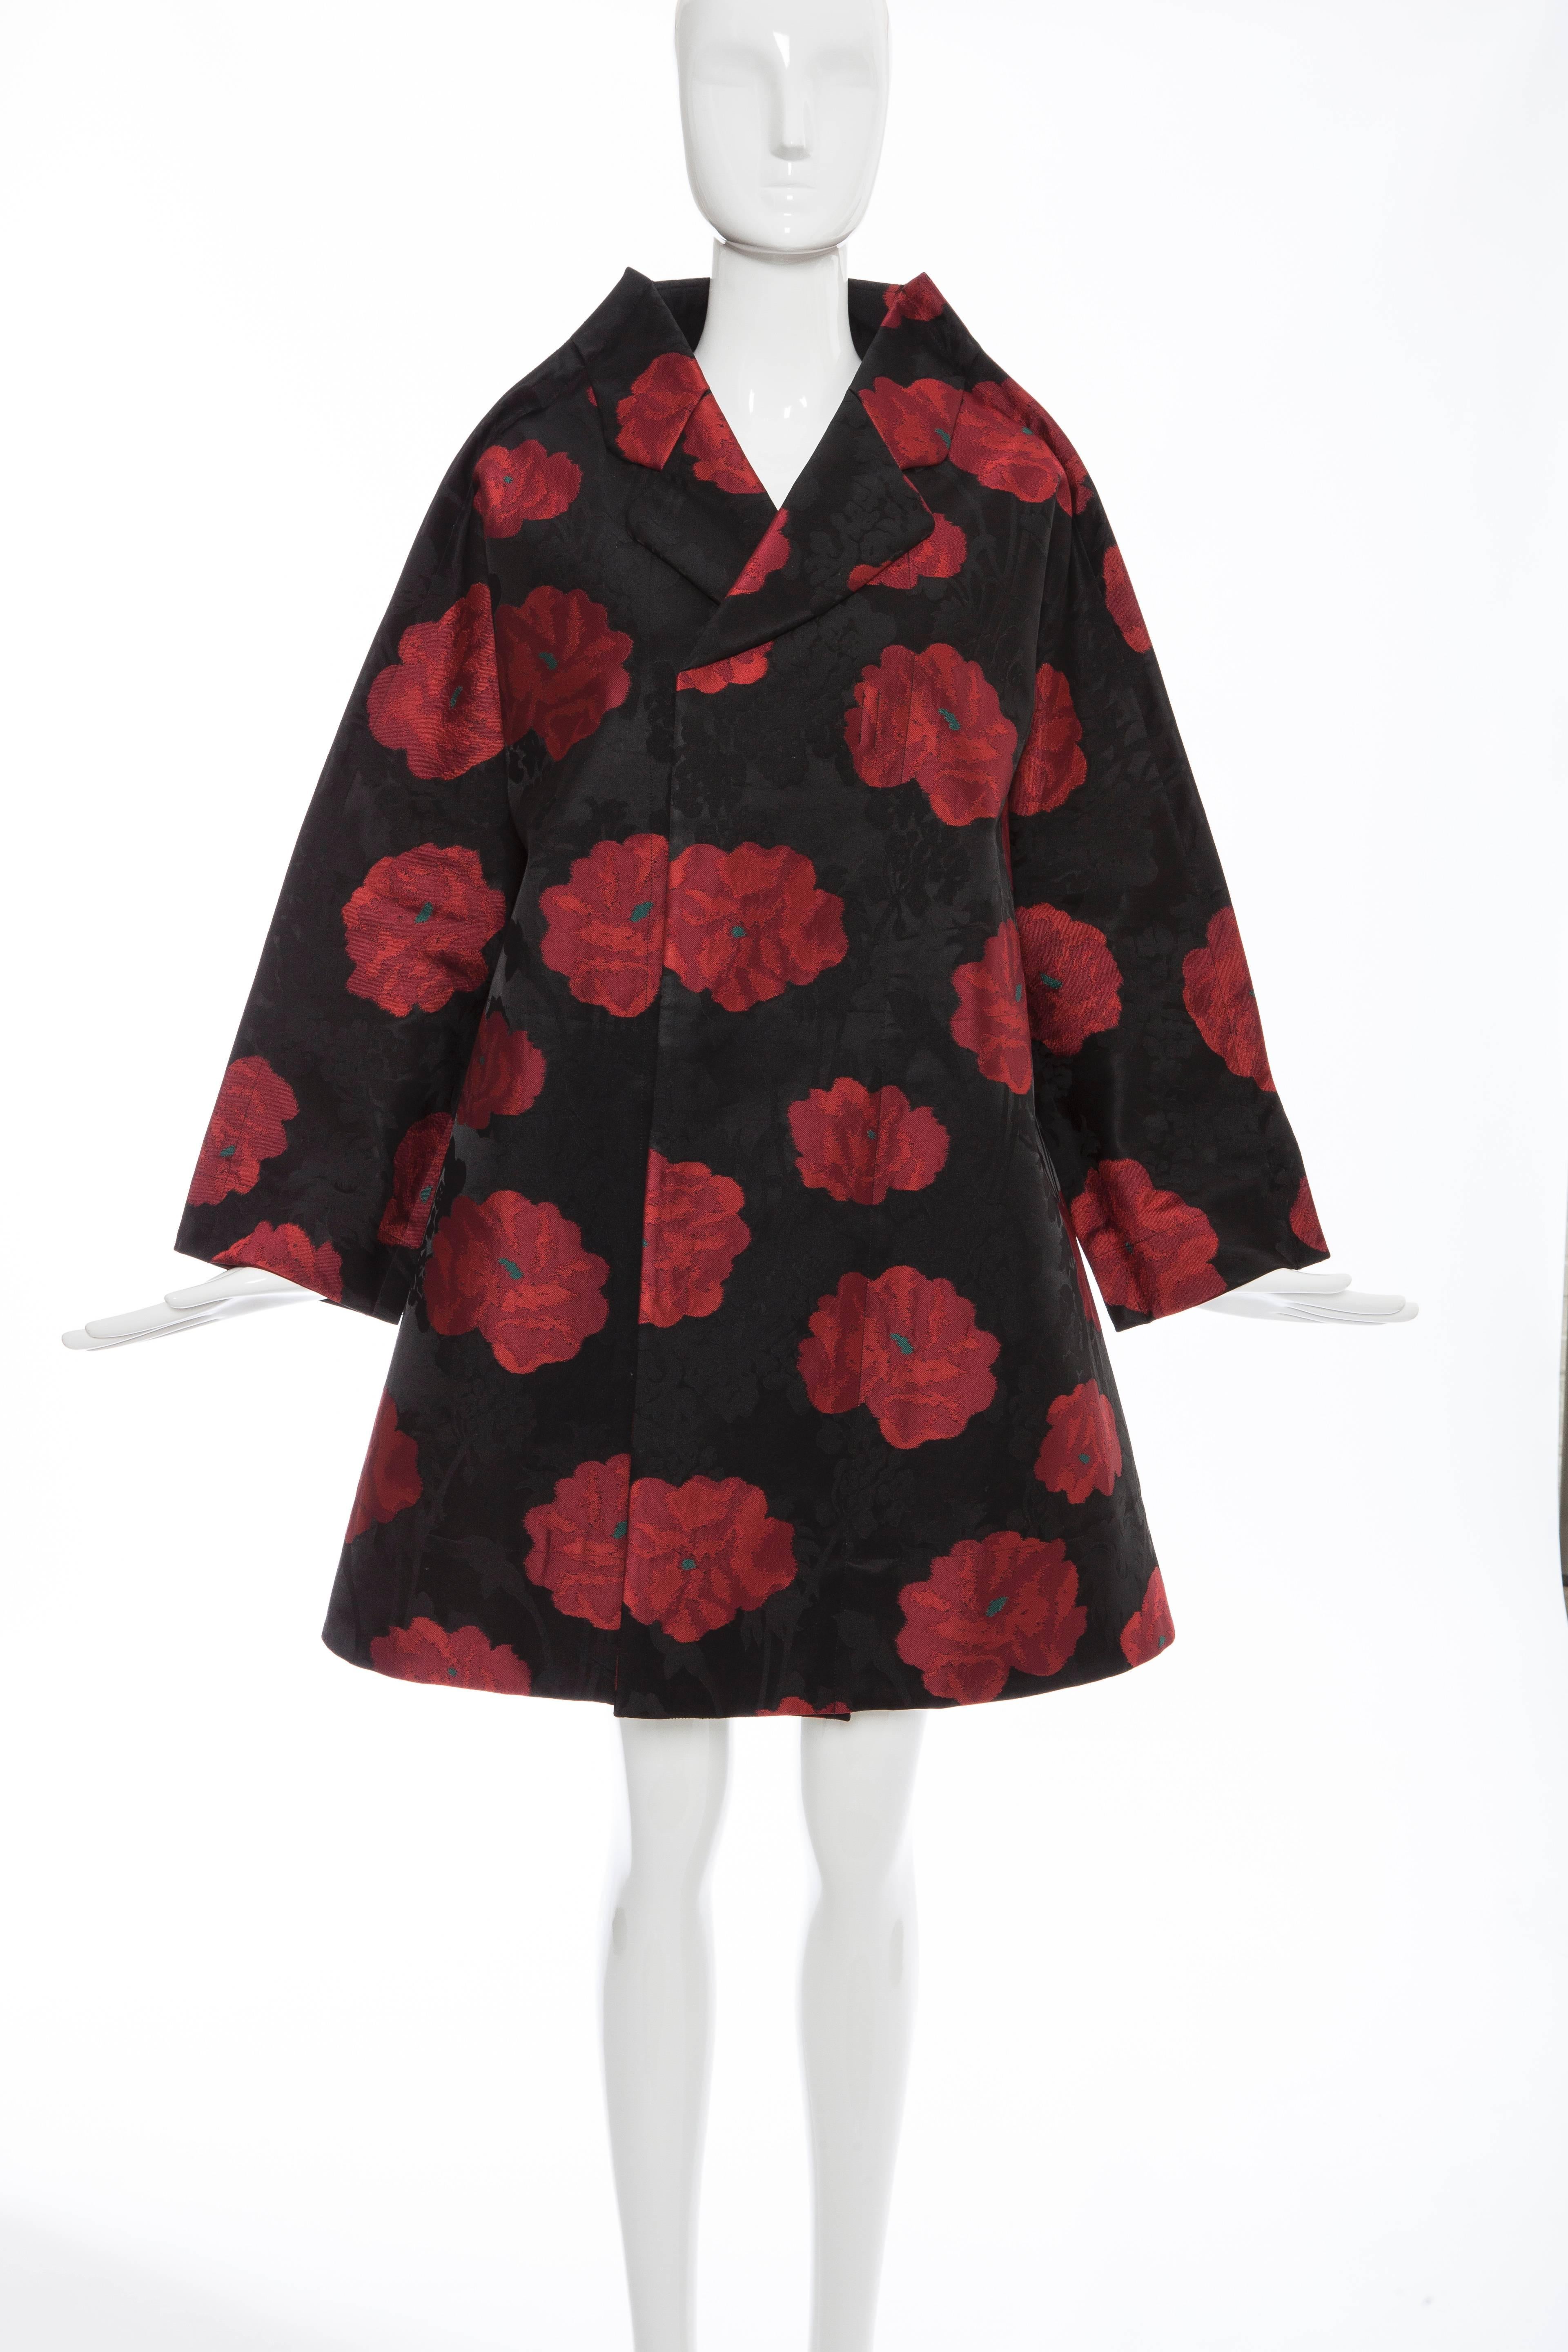 Comme des Garçons, Autumn-Winter 2012, floral jacquard swing coat featuring notched lapels, pockets at interior and sash tie closure at front.

Japan: Small

62% Polyester, 38% Rayon; 100% Polyester; 100% Cotton
Measurements: Bust 48”, Waist